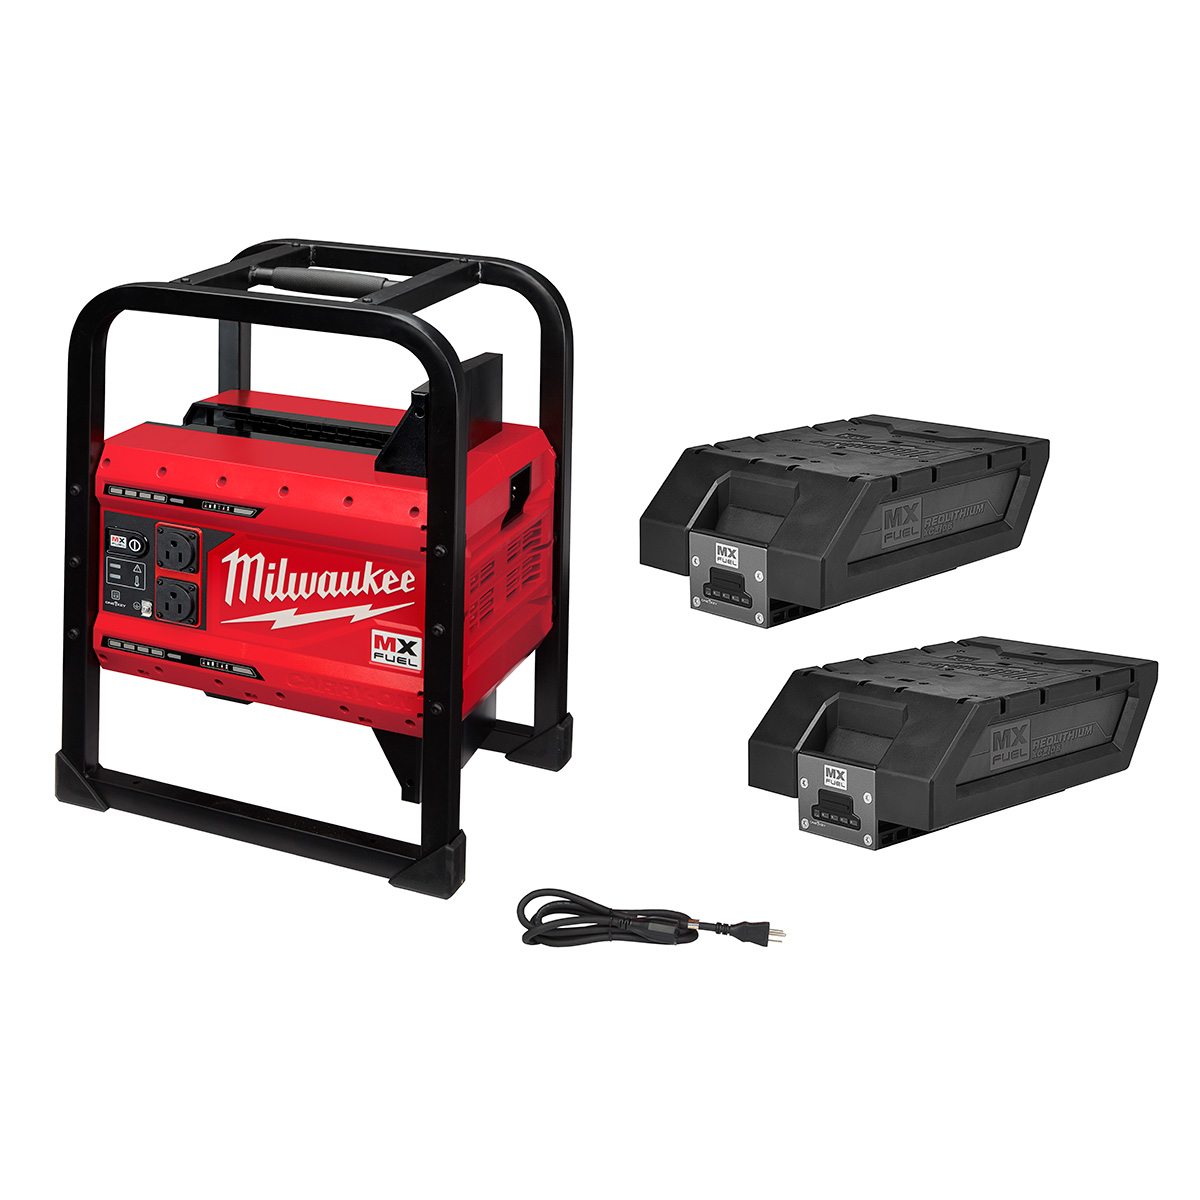 Milwaukee MX FUEL Carry-On 3600W/1800W Power Supply Generator from Columbia Safety